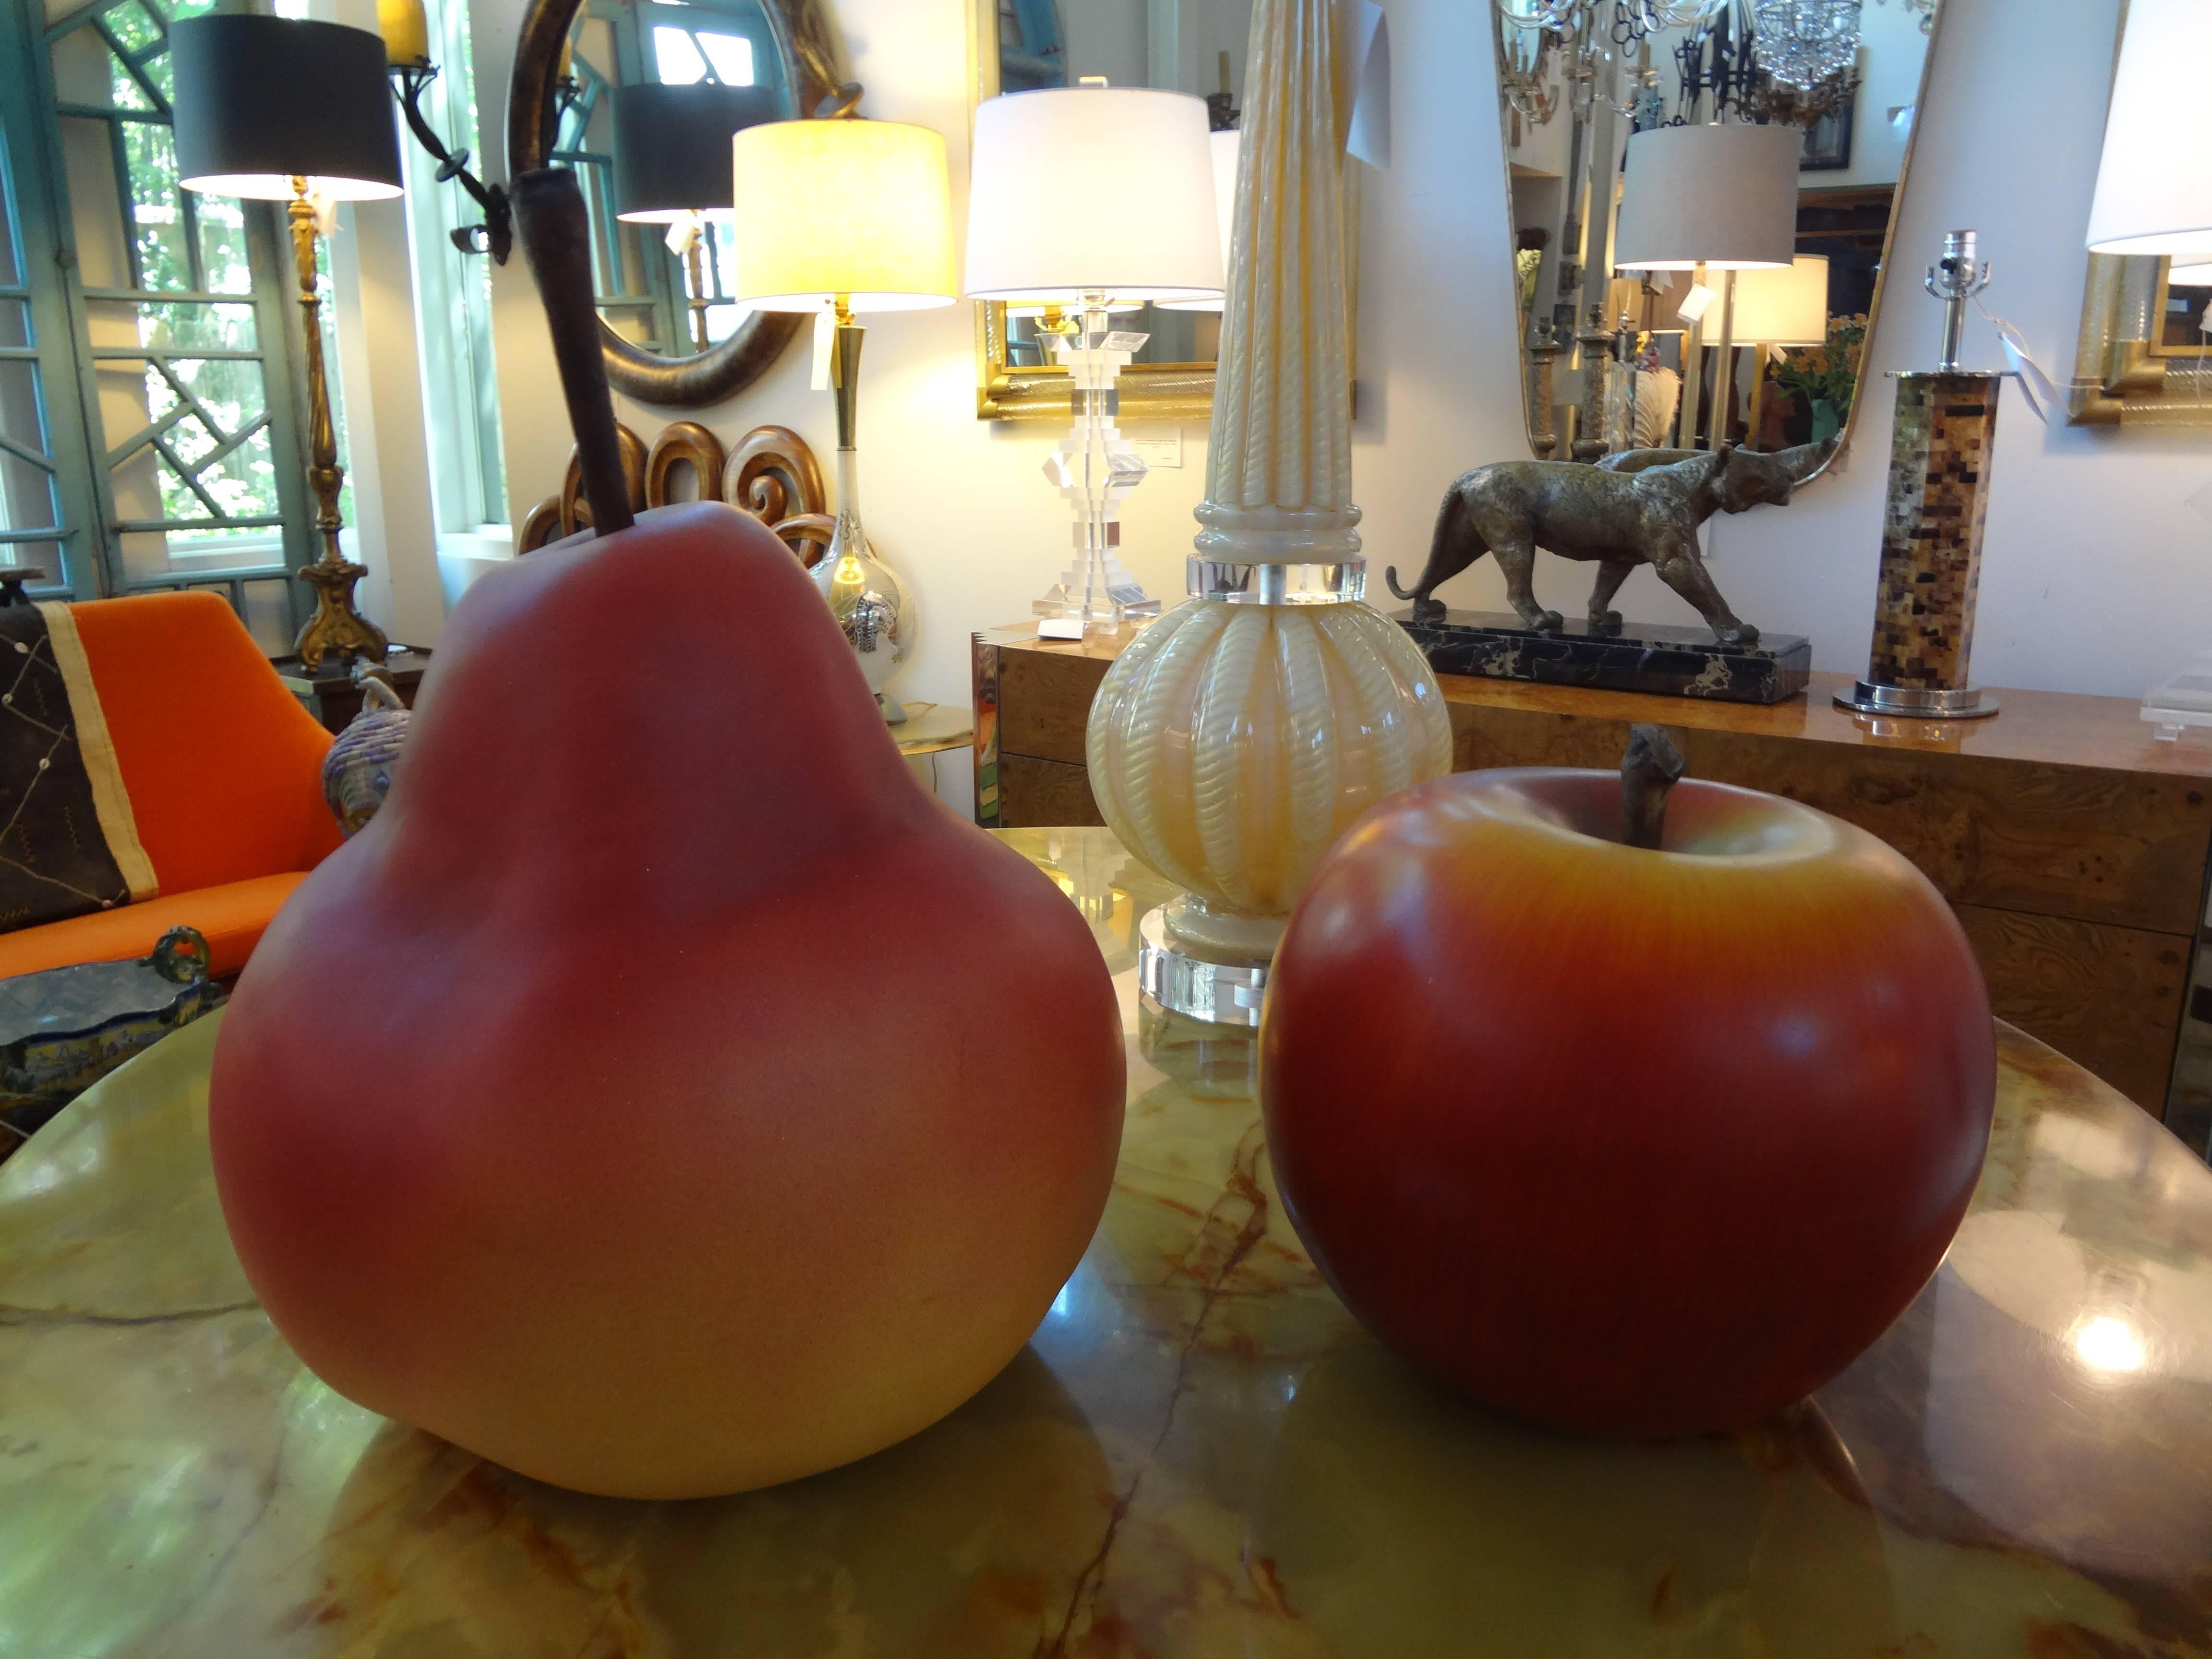 This collection of large Postmodern Pop Art ceramic fruit consists of a pear and an apple. These fruit sculptures are extremely realistic looking. The pear measures: 18